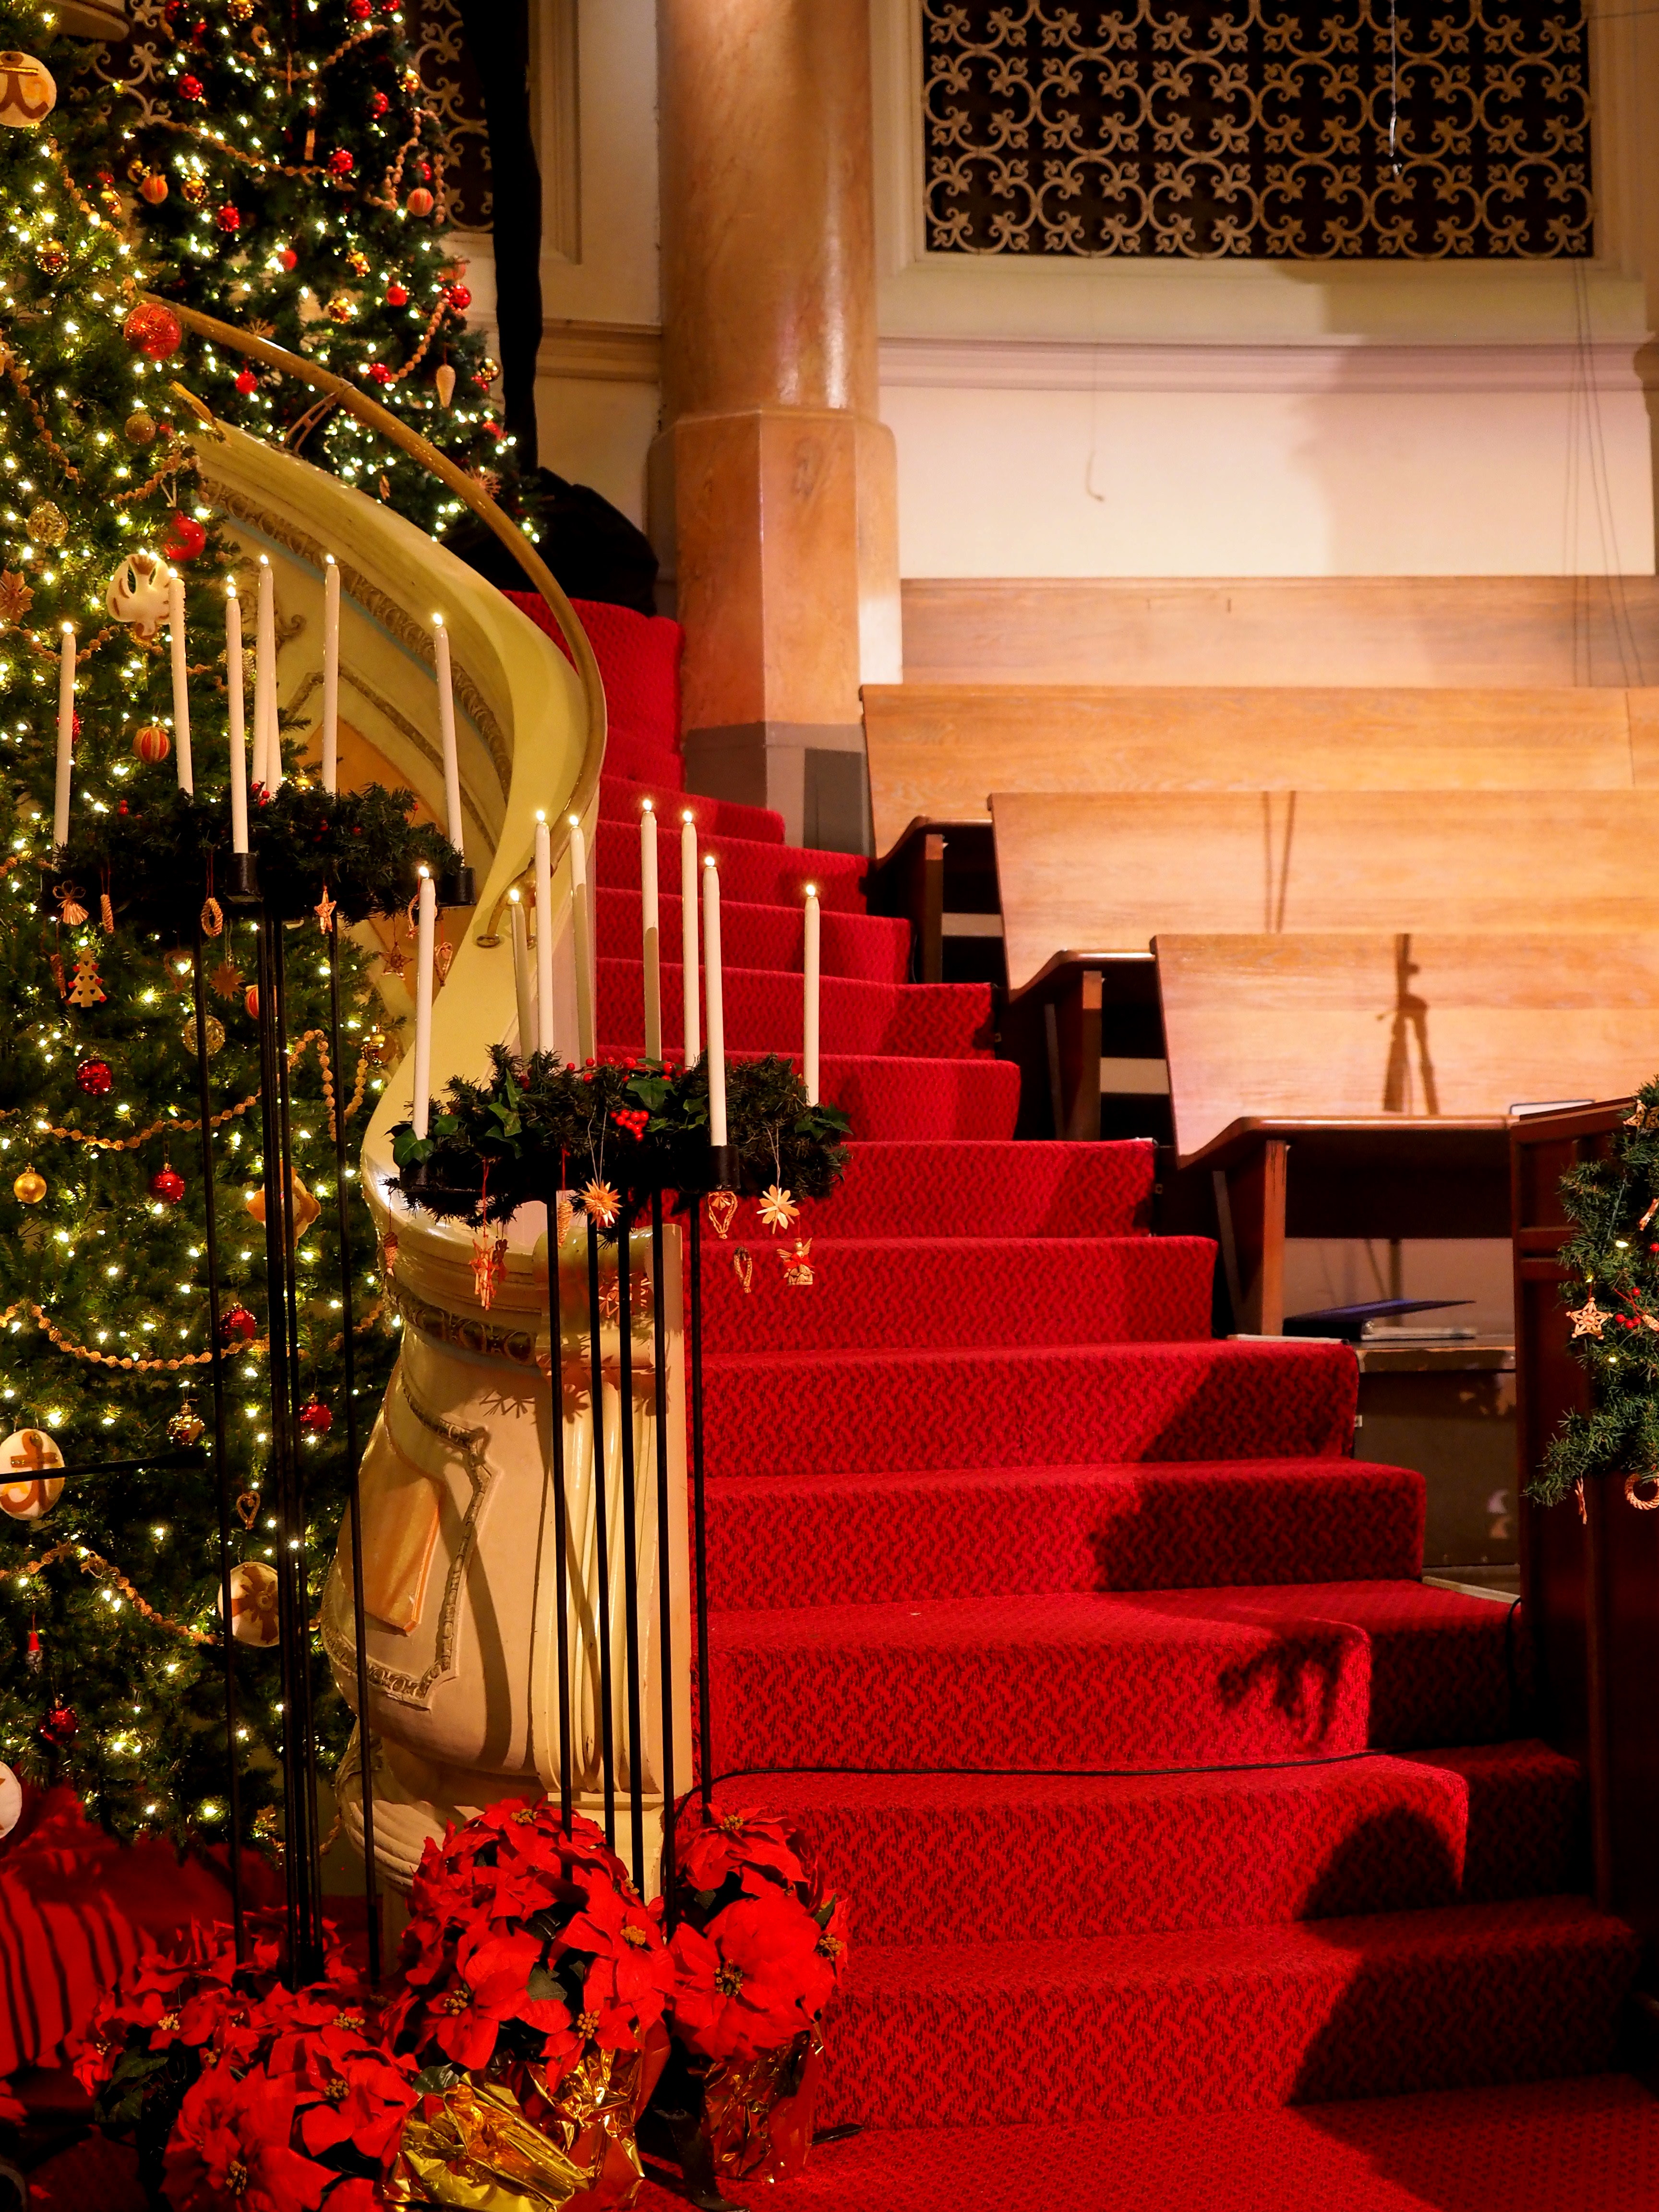 Benches beside stairs in a room decorated for Christmas